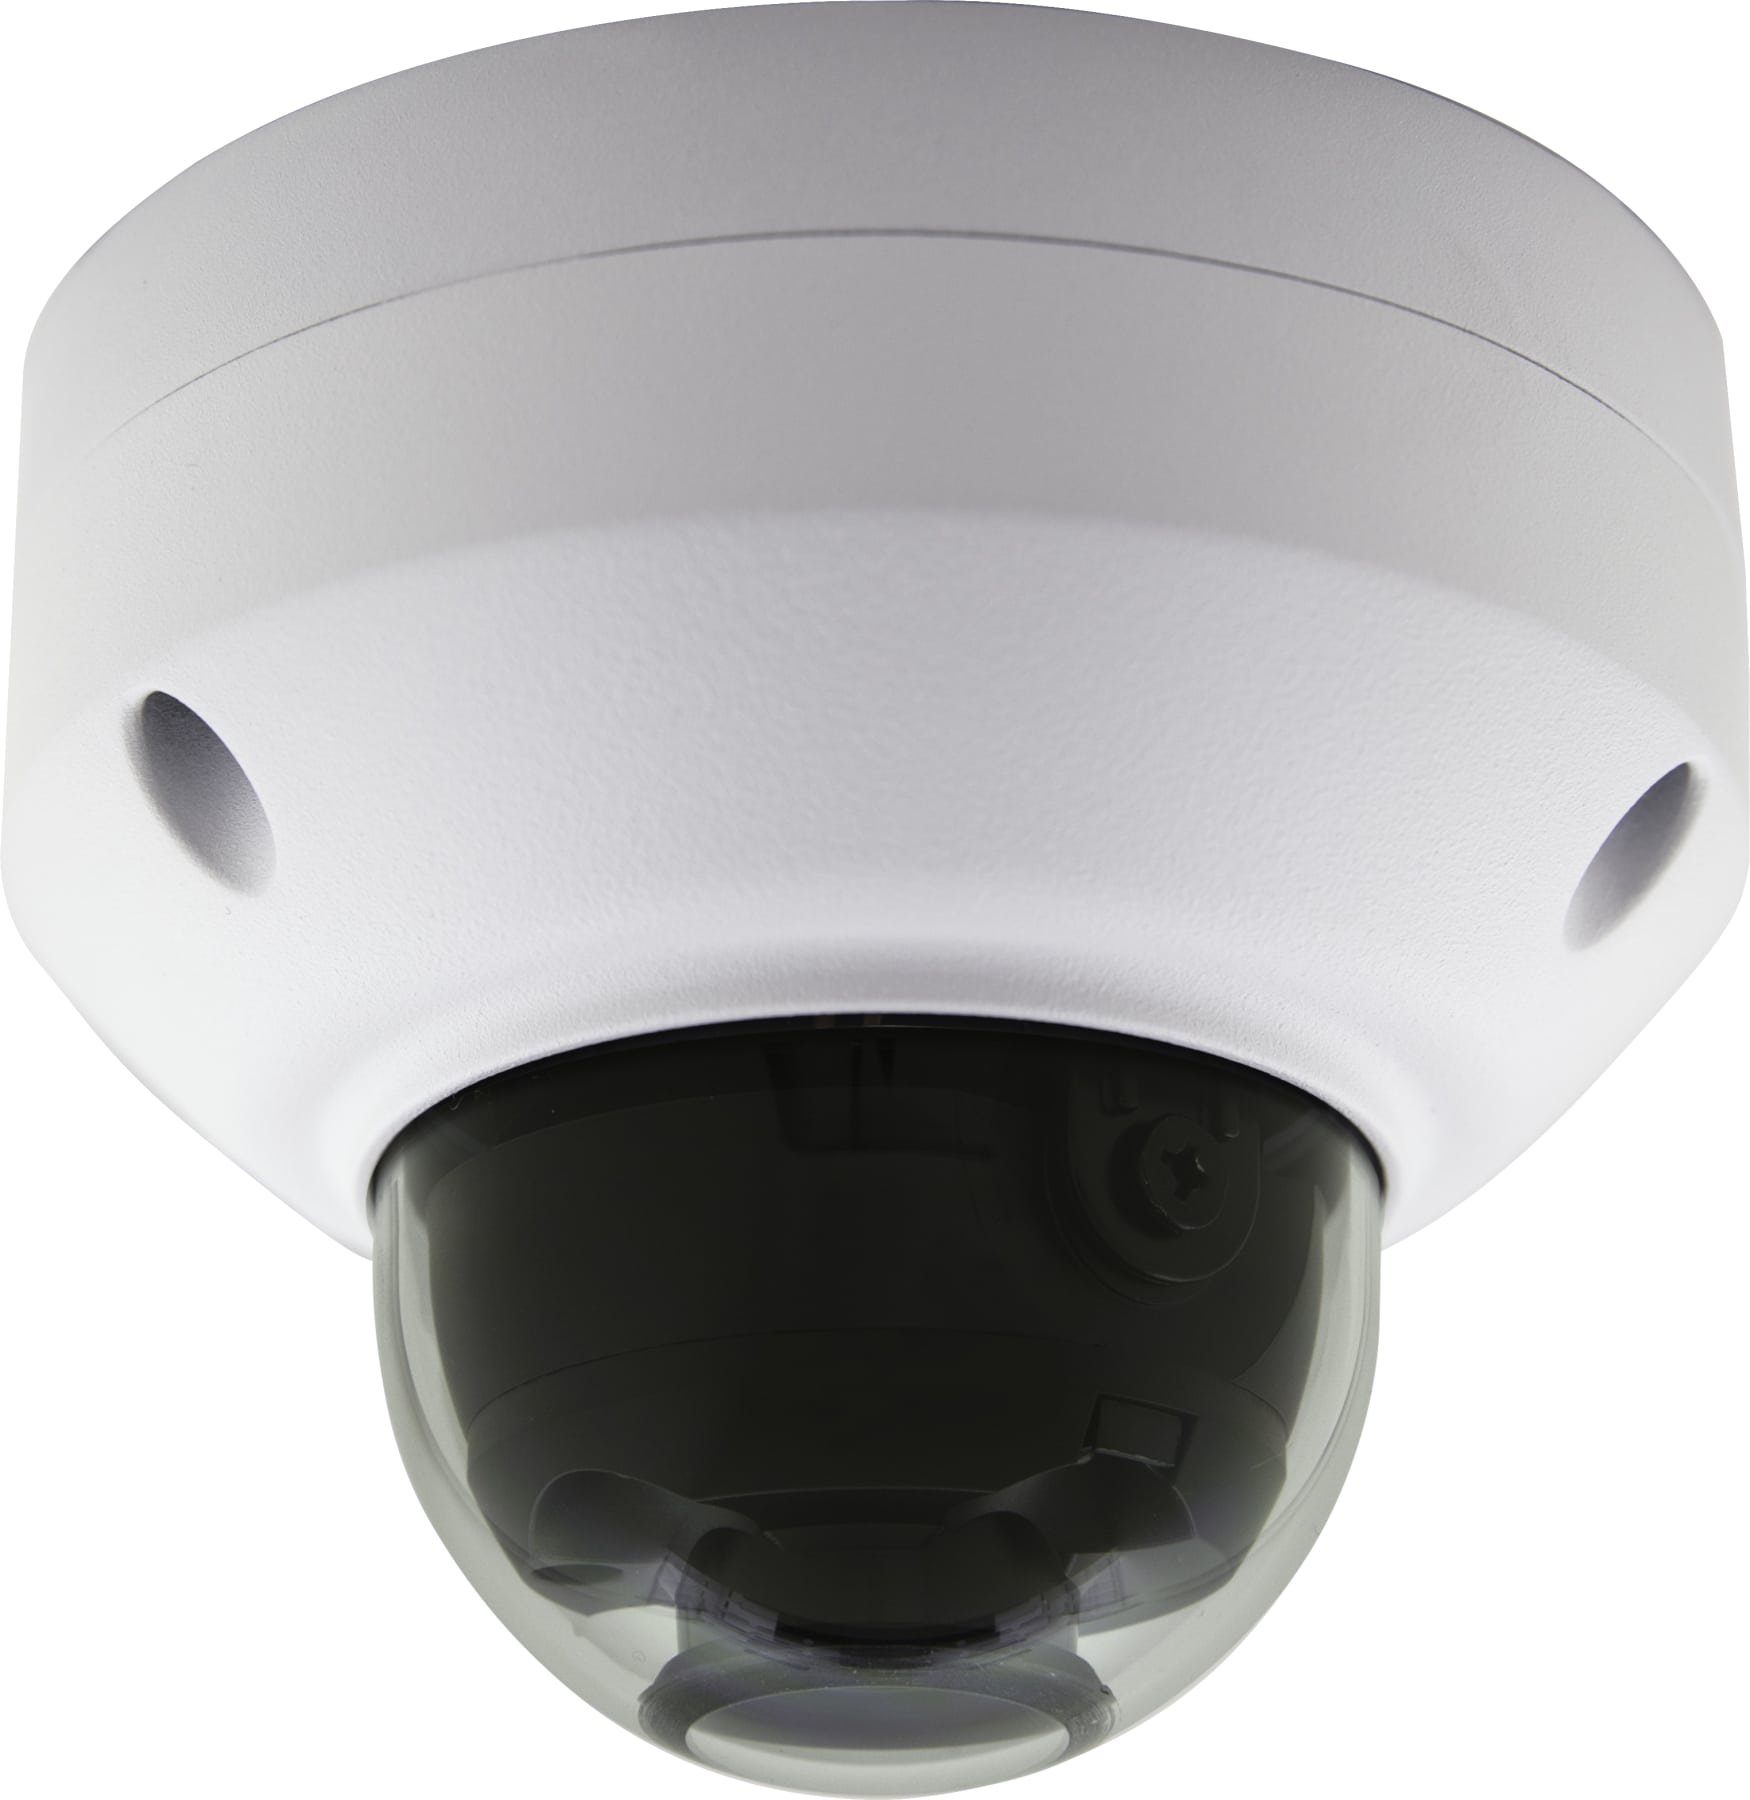 ip cam dome